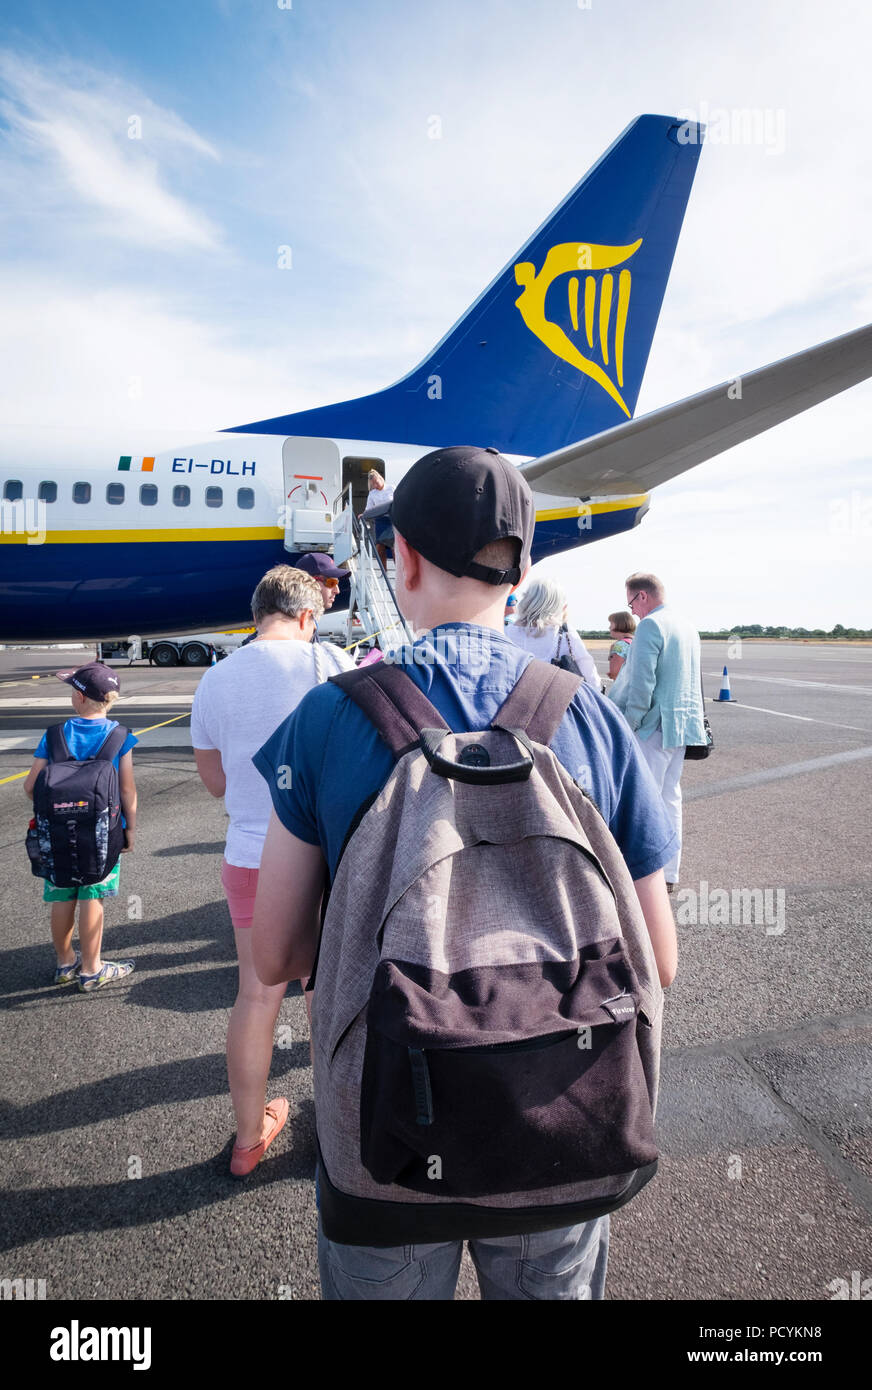 Ryanair passenger with a backpack as carry on hand luggage boarding a Ryanair plane after paying extra for priority boarding. Stock Photo